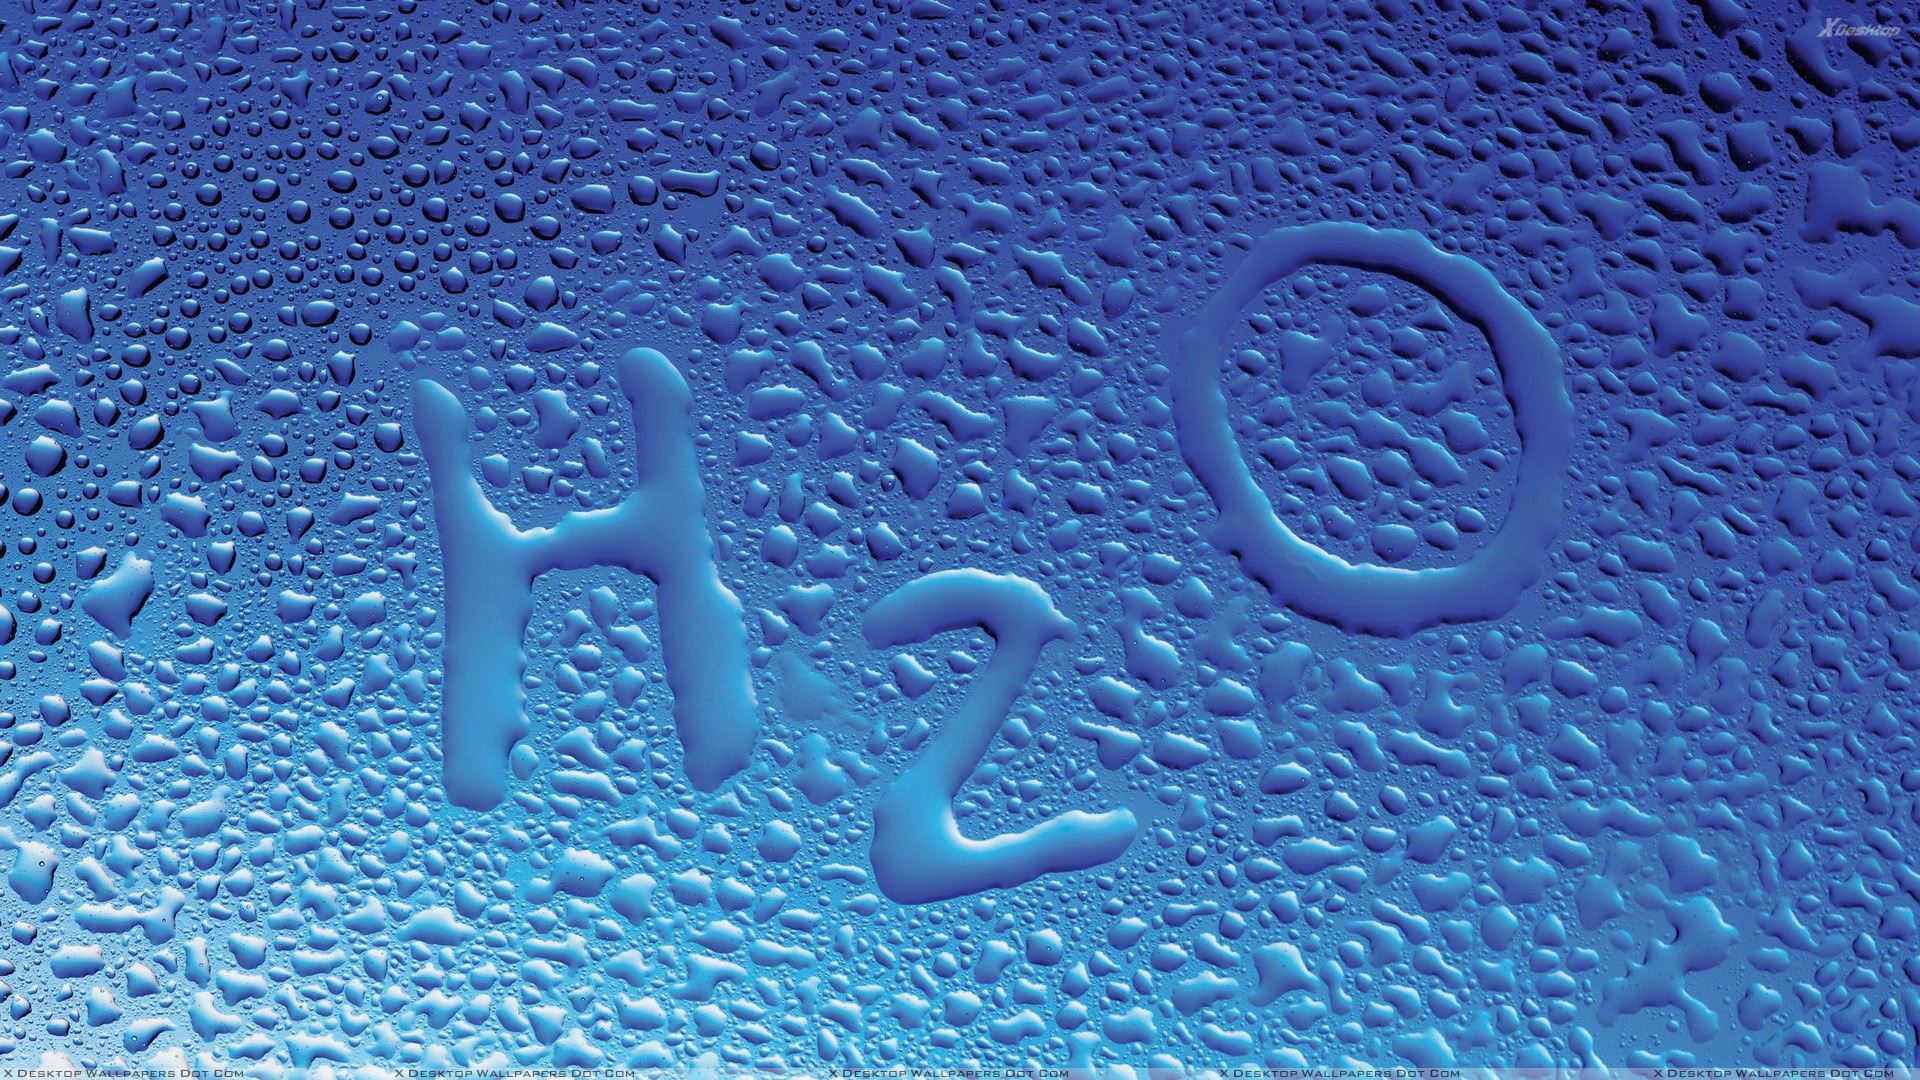 Water Drops Wallpaper Photos Image In HD